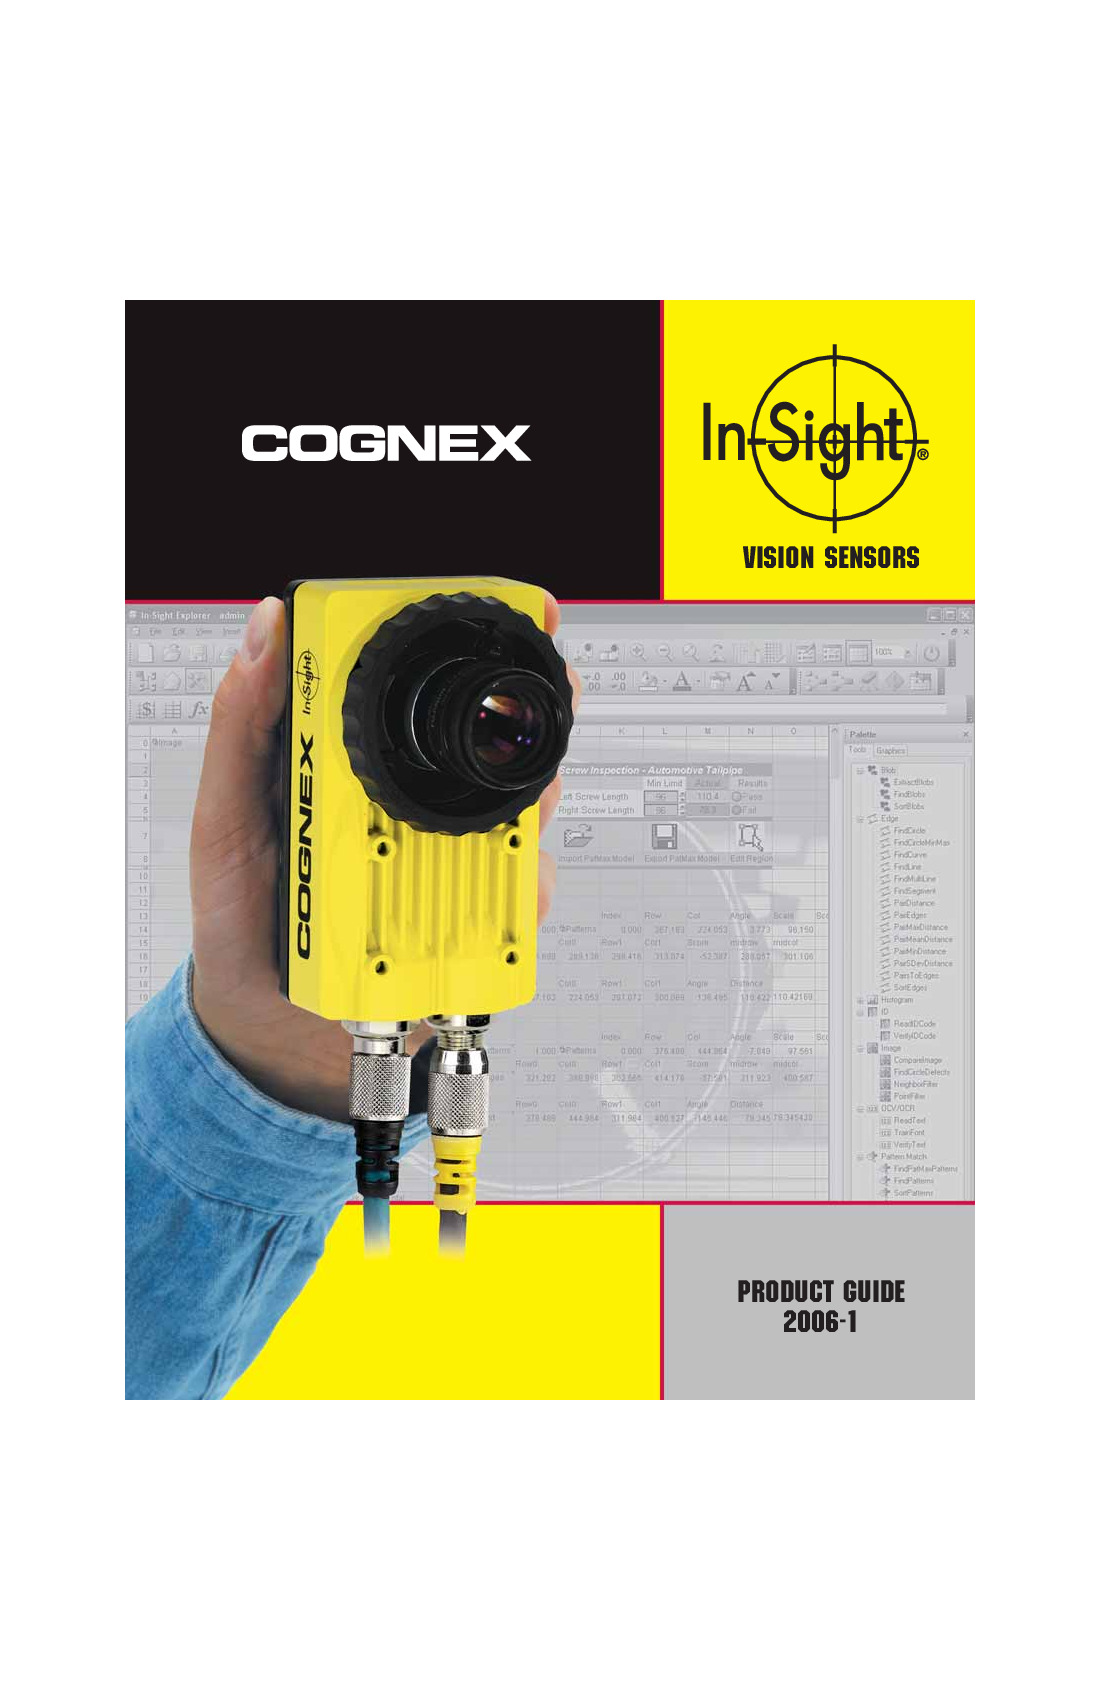 First Page Image of IS5410-01 In-Sight Brochure.pdf